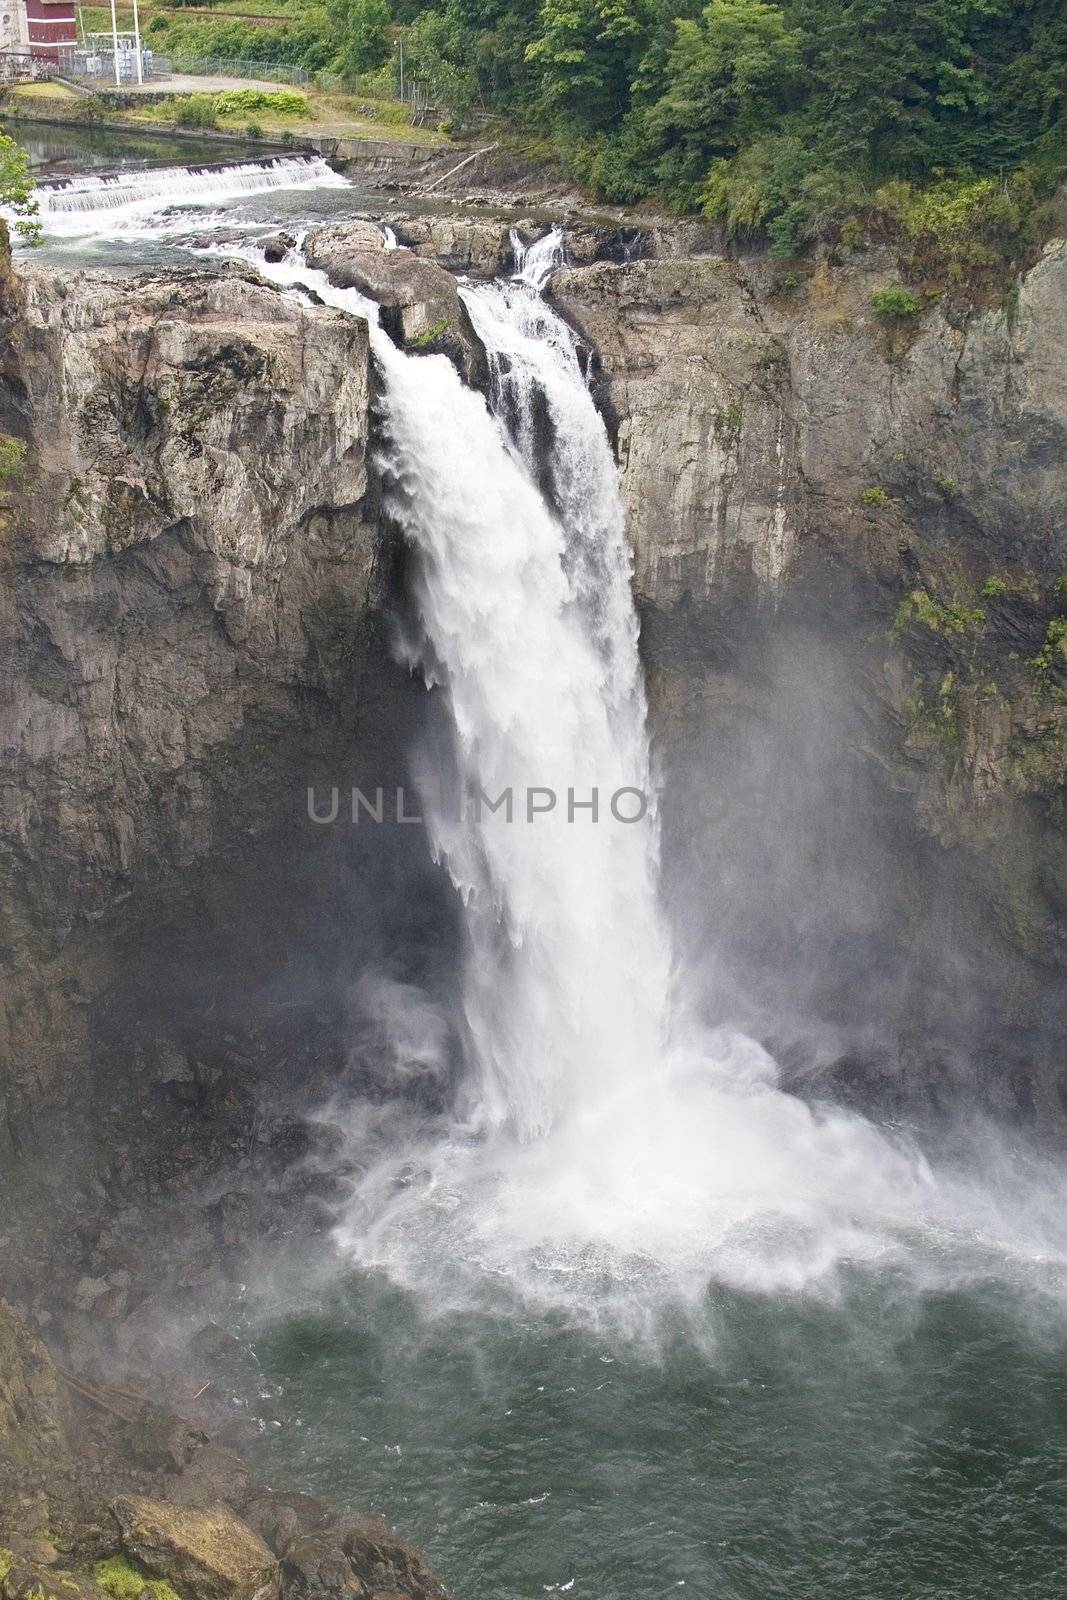 Snoqualmie Falls near Seattle, Washington, is a hydroelectric plant as well as a beautiful spot.